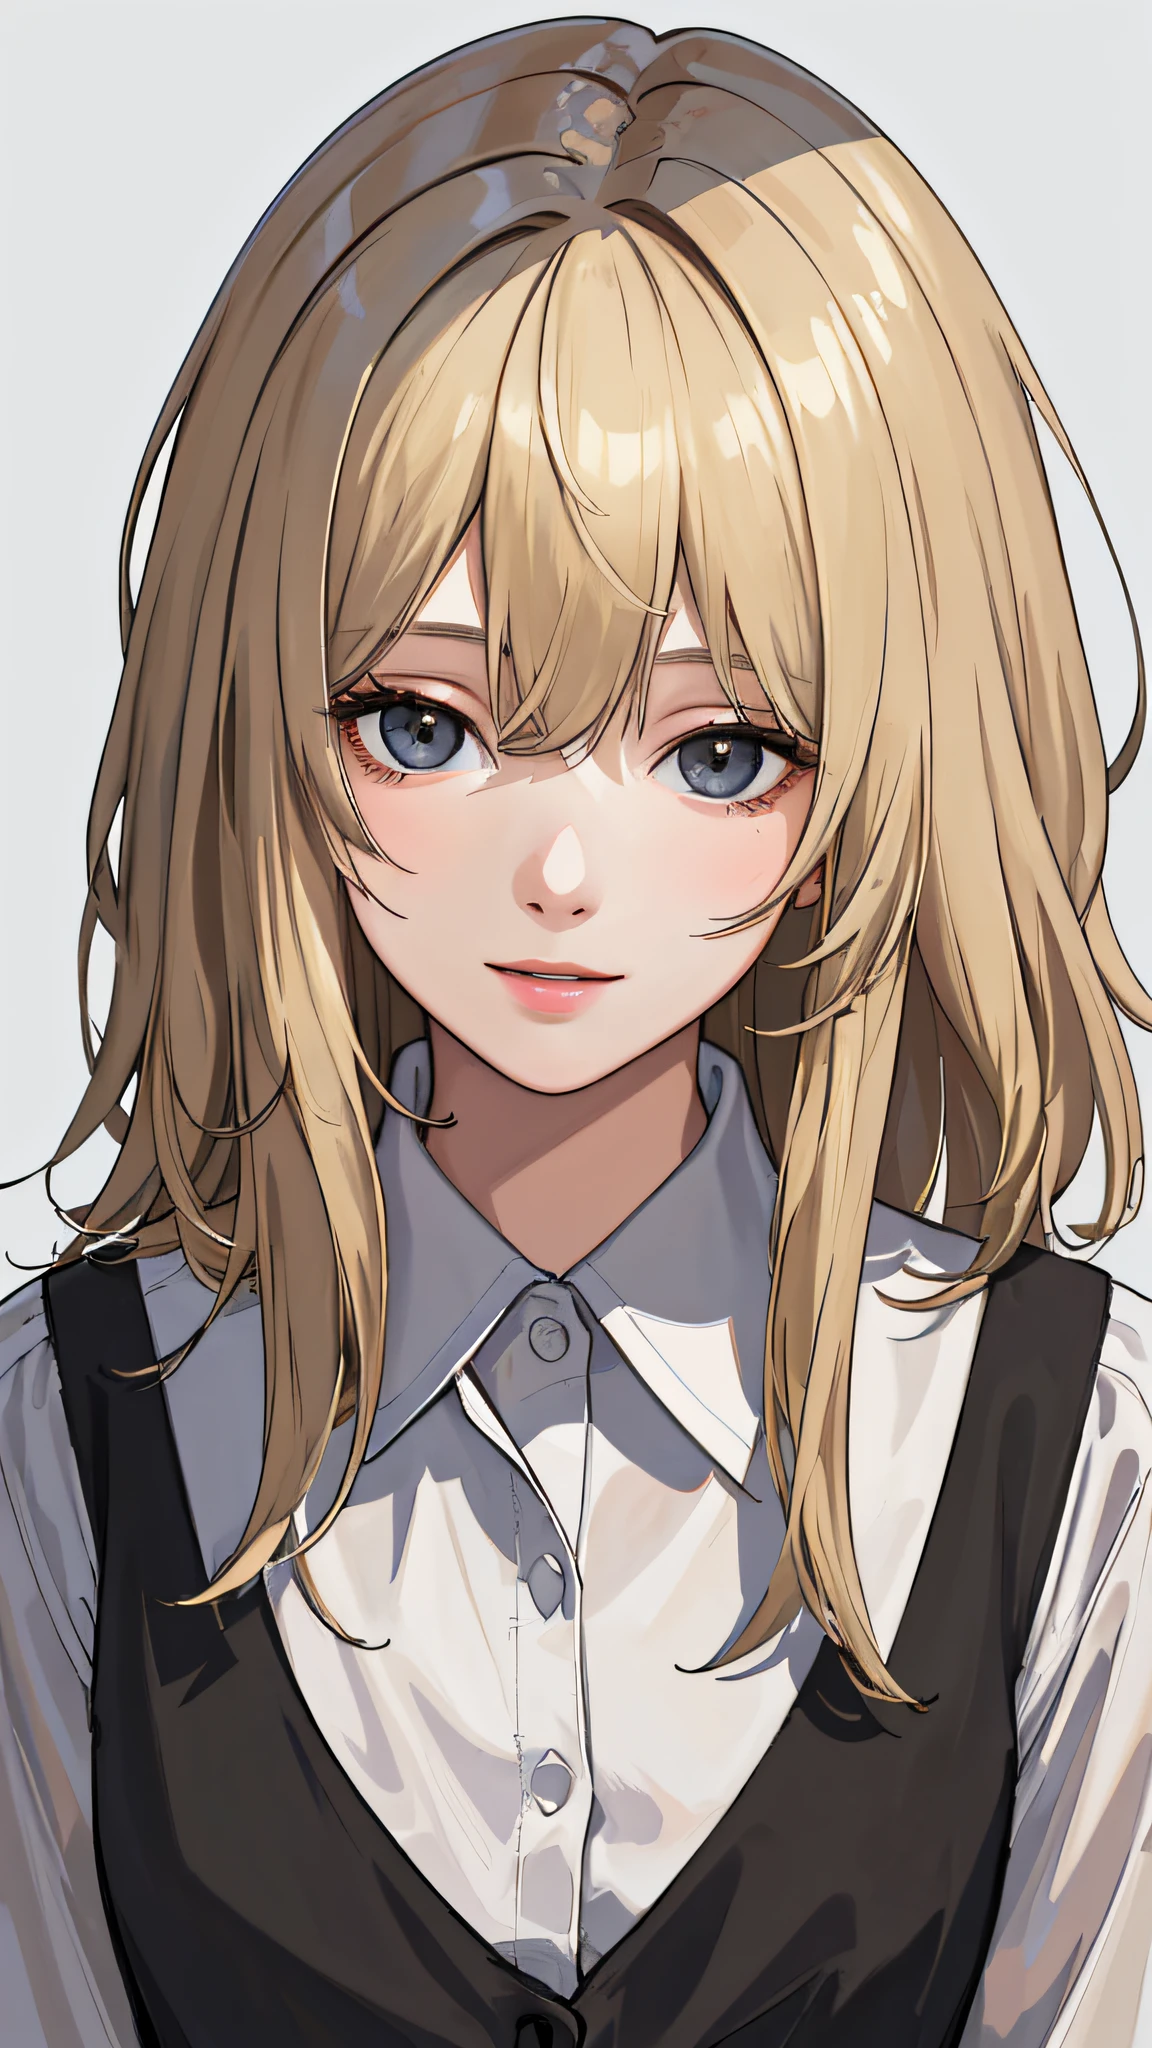 (masterpiece:1.1), (best quality),(disheveled hair),(illustration), (1girl), adult, [realistic], standing, looking at viewer, close up, happy, (simple background), detailed beautiful face, (white professional shirt), dirty blonde hair, medium length hair, bangs, hair in face, shaggy hair, superflat style, gray background, dark lighting